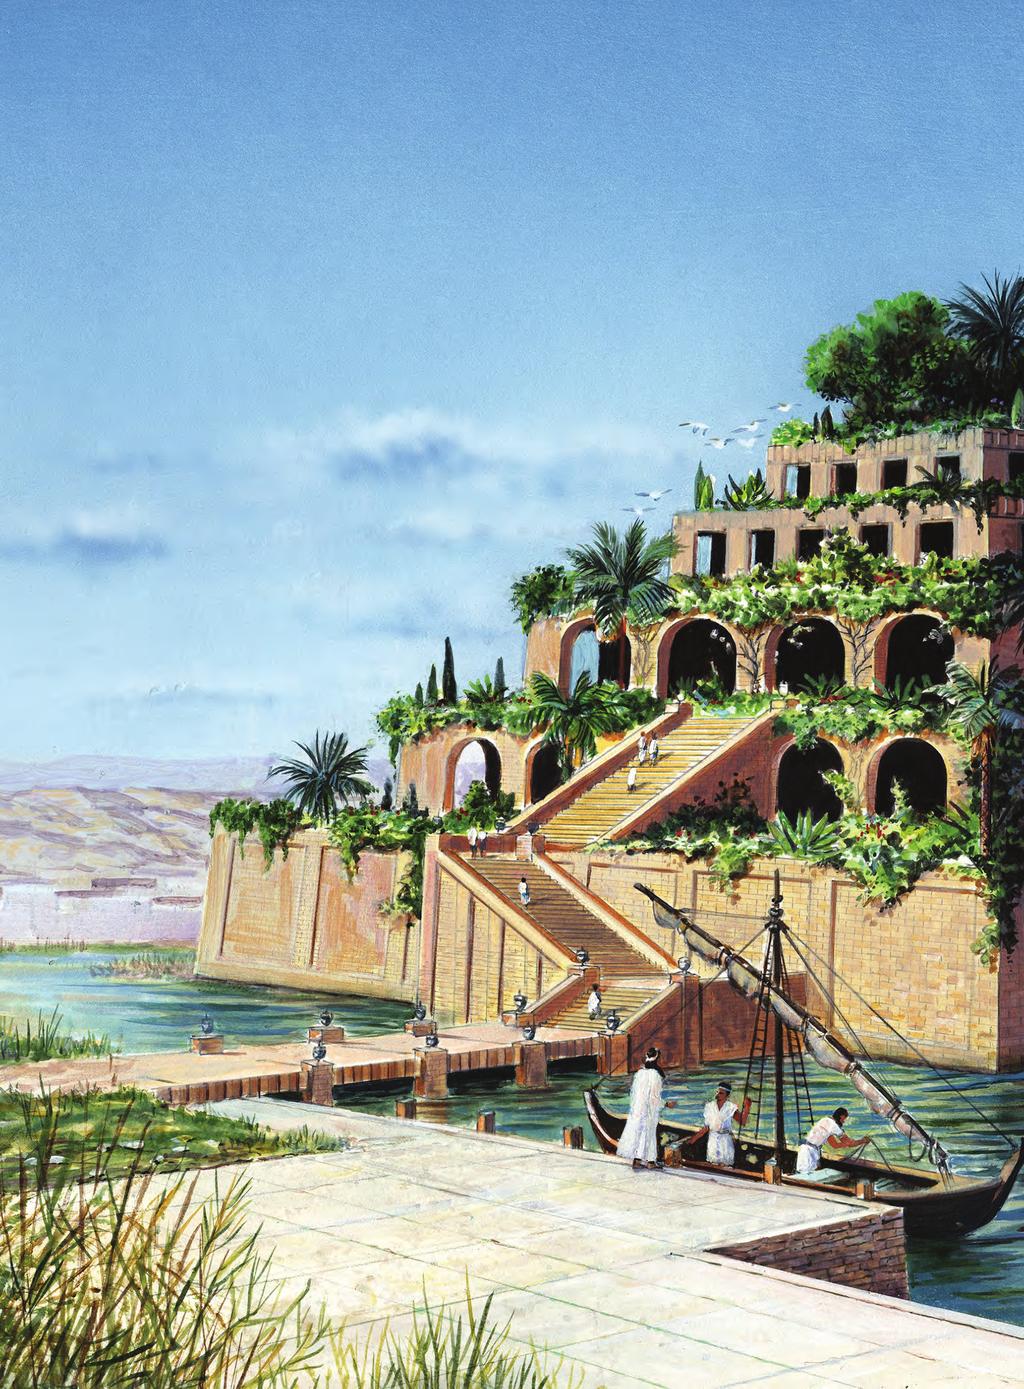 The Hanging Gardens of Babylon Nebuchadnezzar II, ruler of Babylonia from 605 to 562 bce, brought the capital city of Babylon back to its former grandeur and then some!